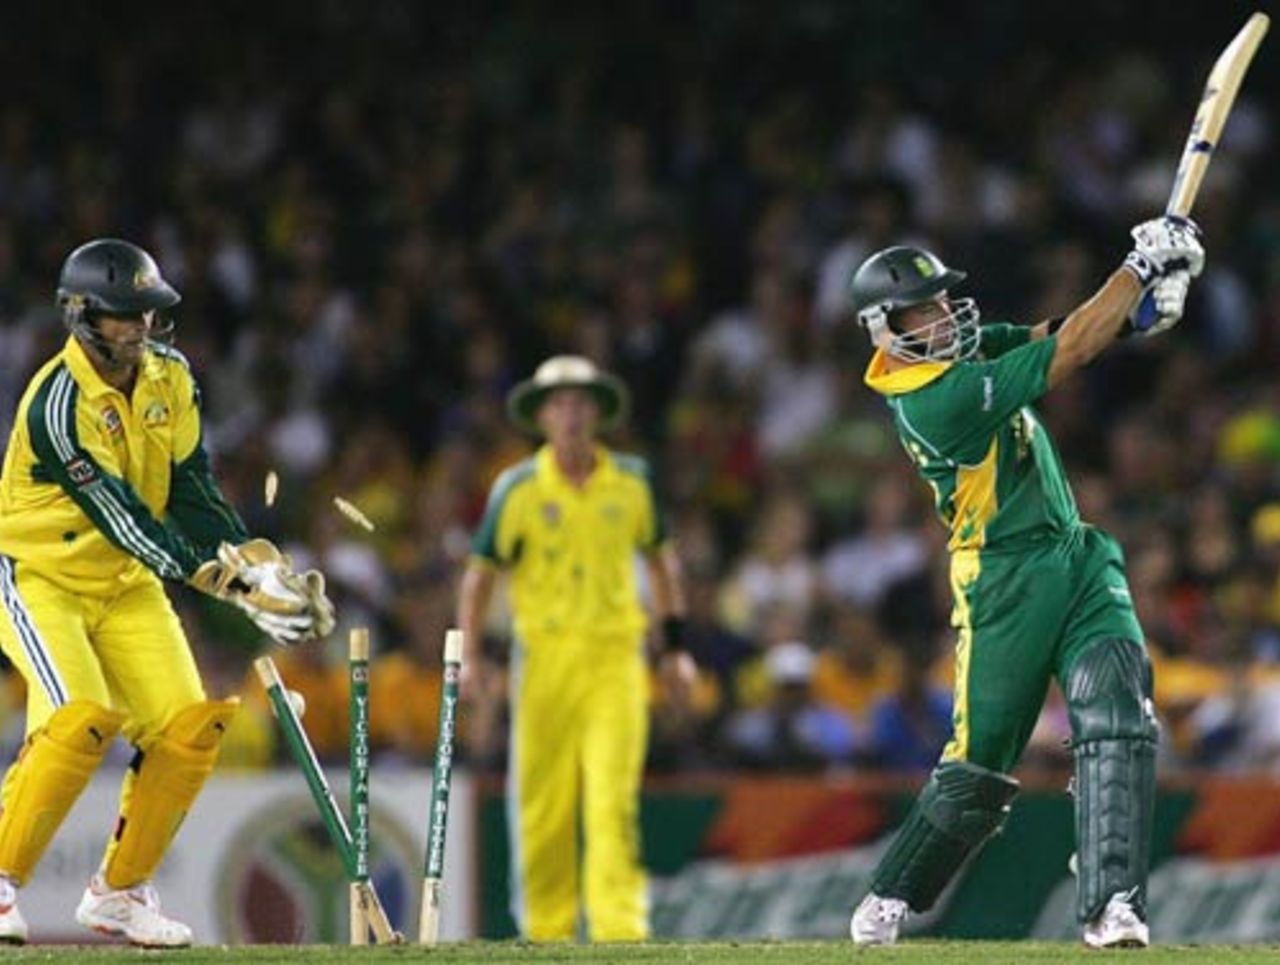 Herschelle Gibbs goes for a big slog and loses his stumps, Australia v South Africa, VB Series, Melbourne, February 3, 2006